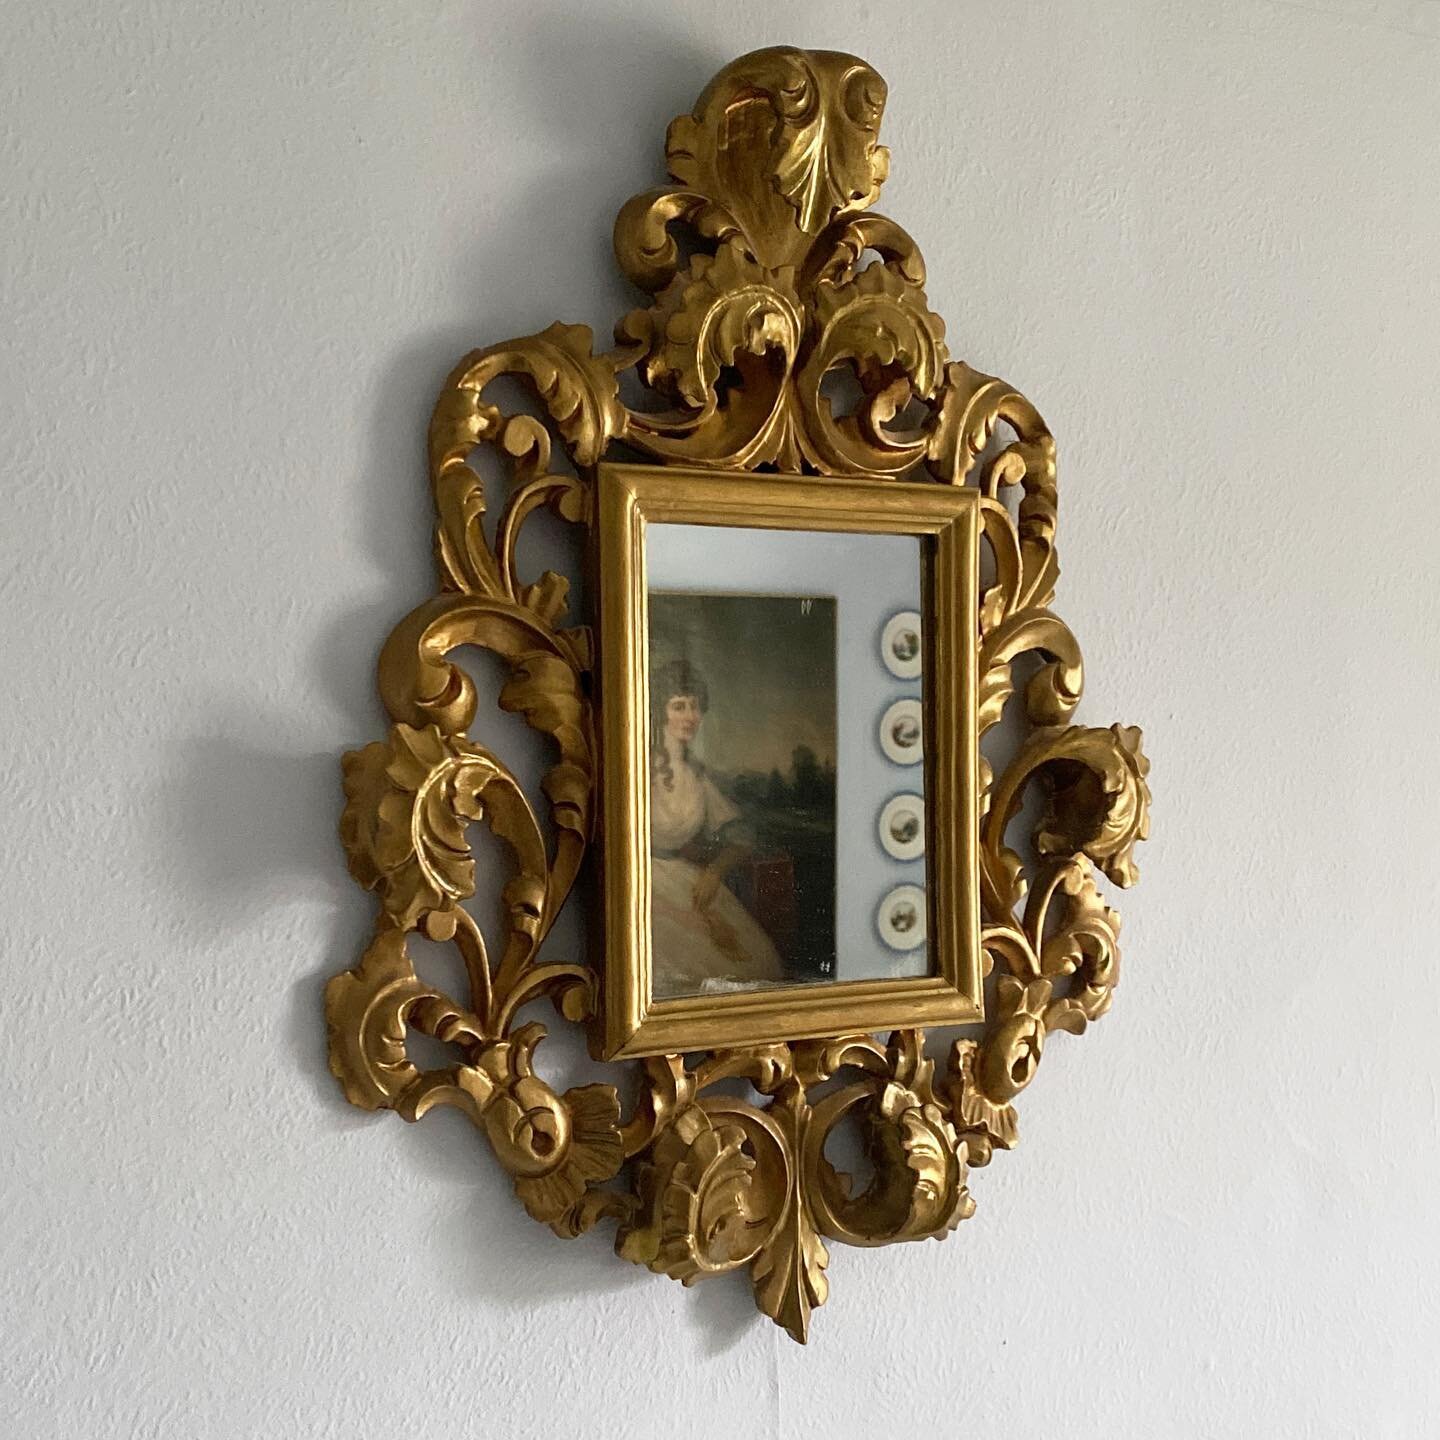 ✨ Italian Ornately carved gold gilt mirror, 46cm x 50cm

&pound;250

Free mainland delivery.
Link in bio to purchase or for any additional information. DM with any questions. 
.
.
.
.

#antiquemirror #antiquesofinstagram #antiqueshop #londonhome #ant